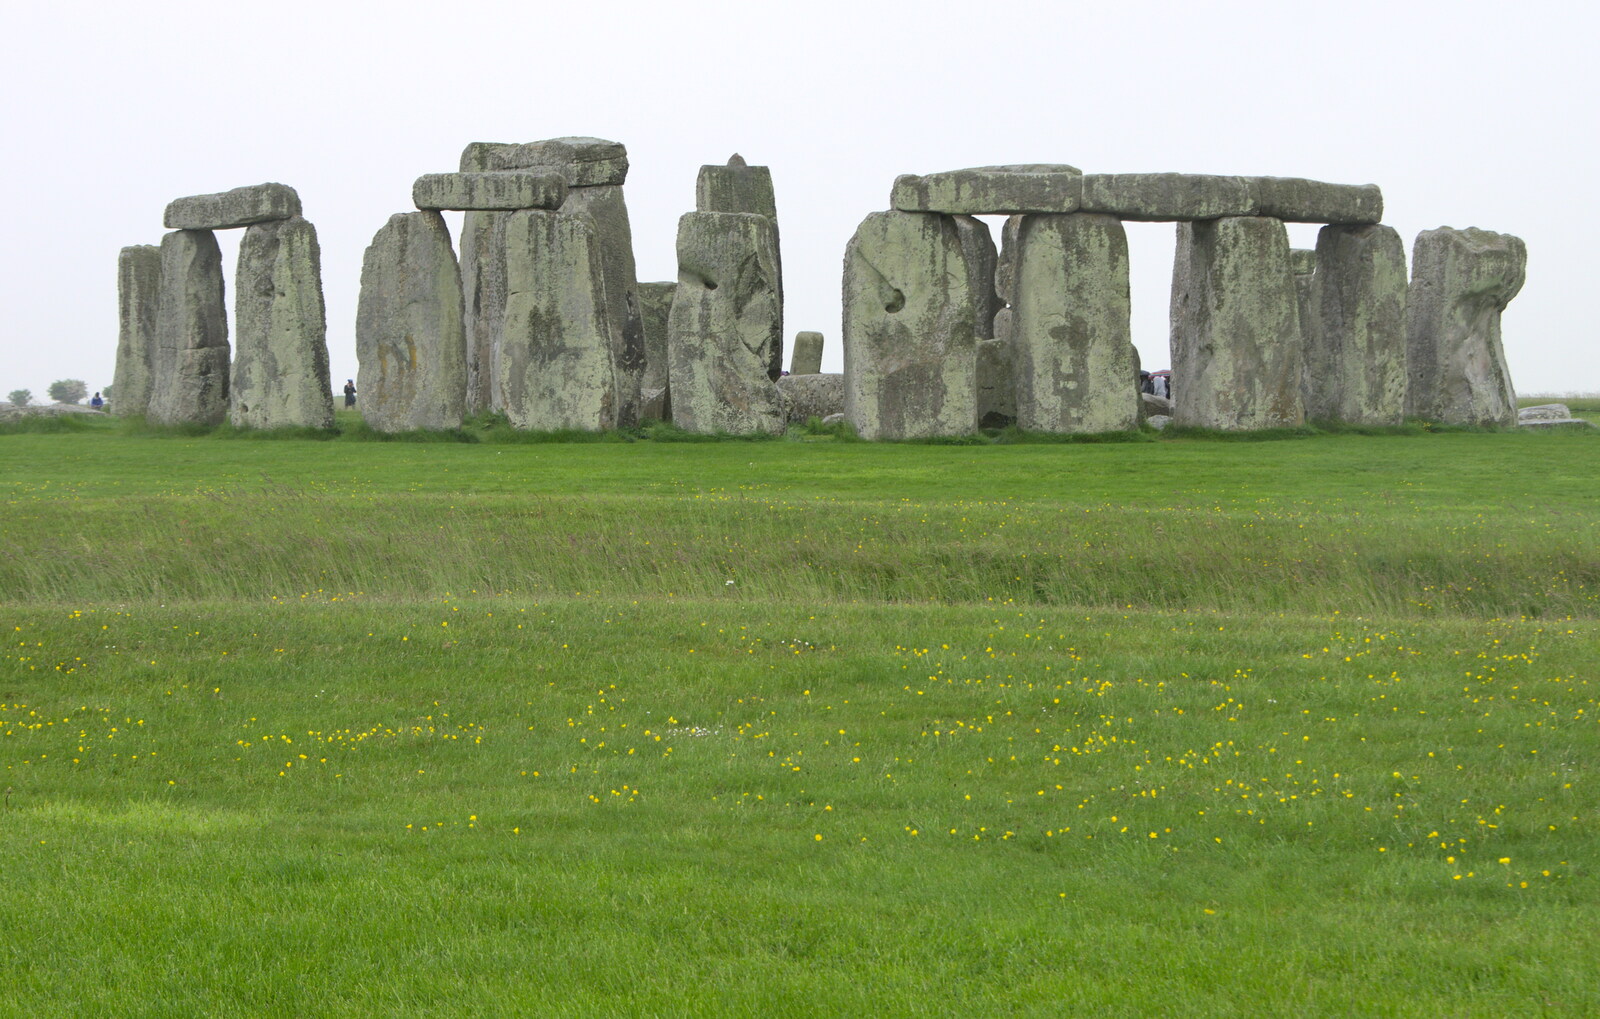 The more-complete western side of Stonehenge from Spreyton to Stonehenge, Salisbury Plain, Wiltshire - 31st May 2016